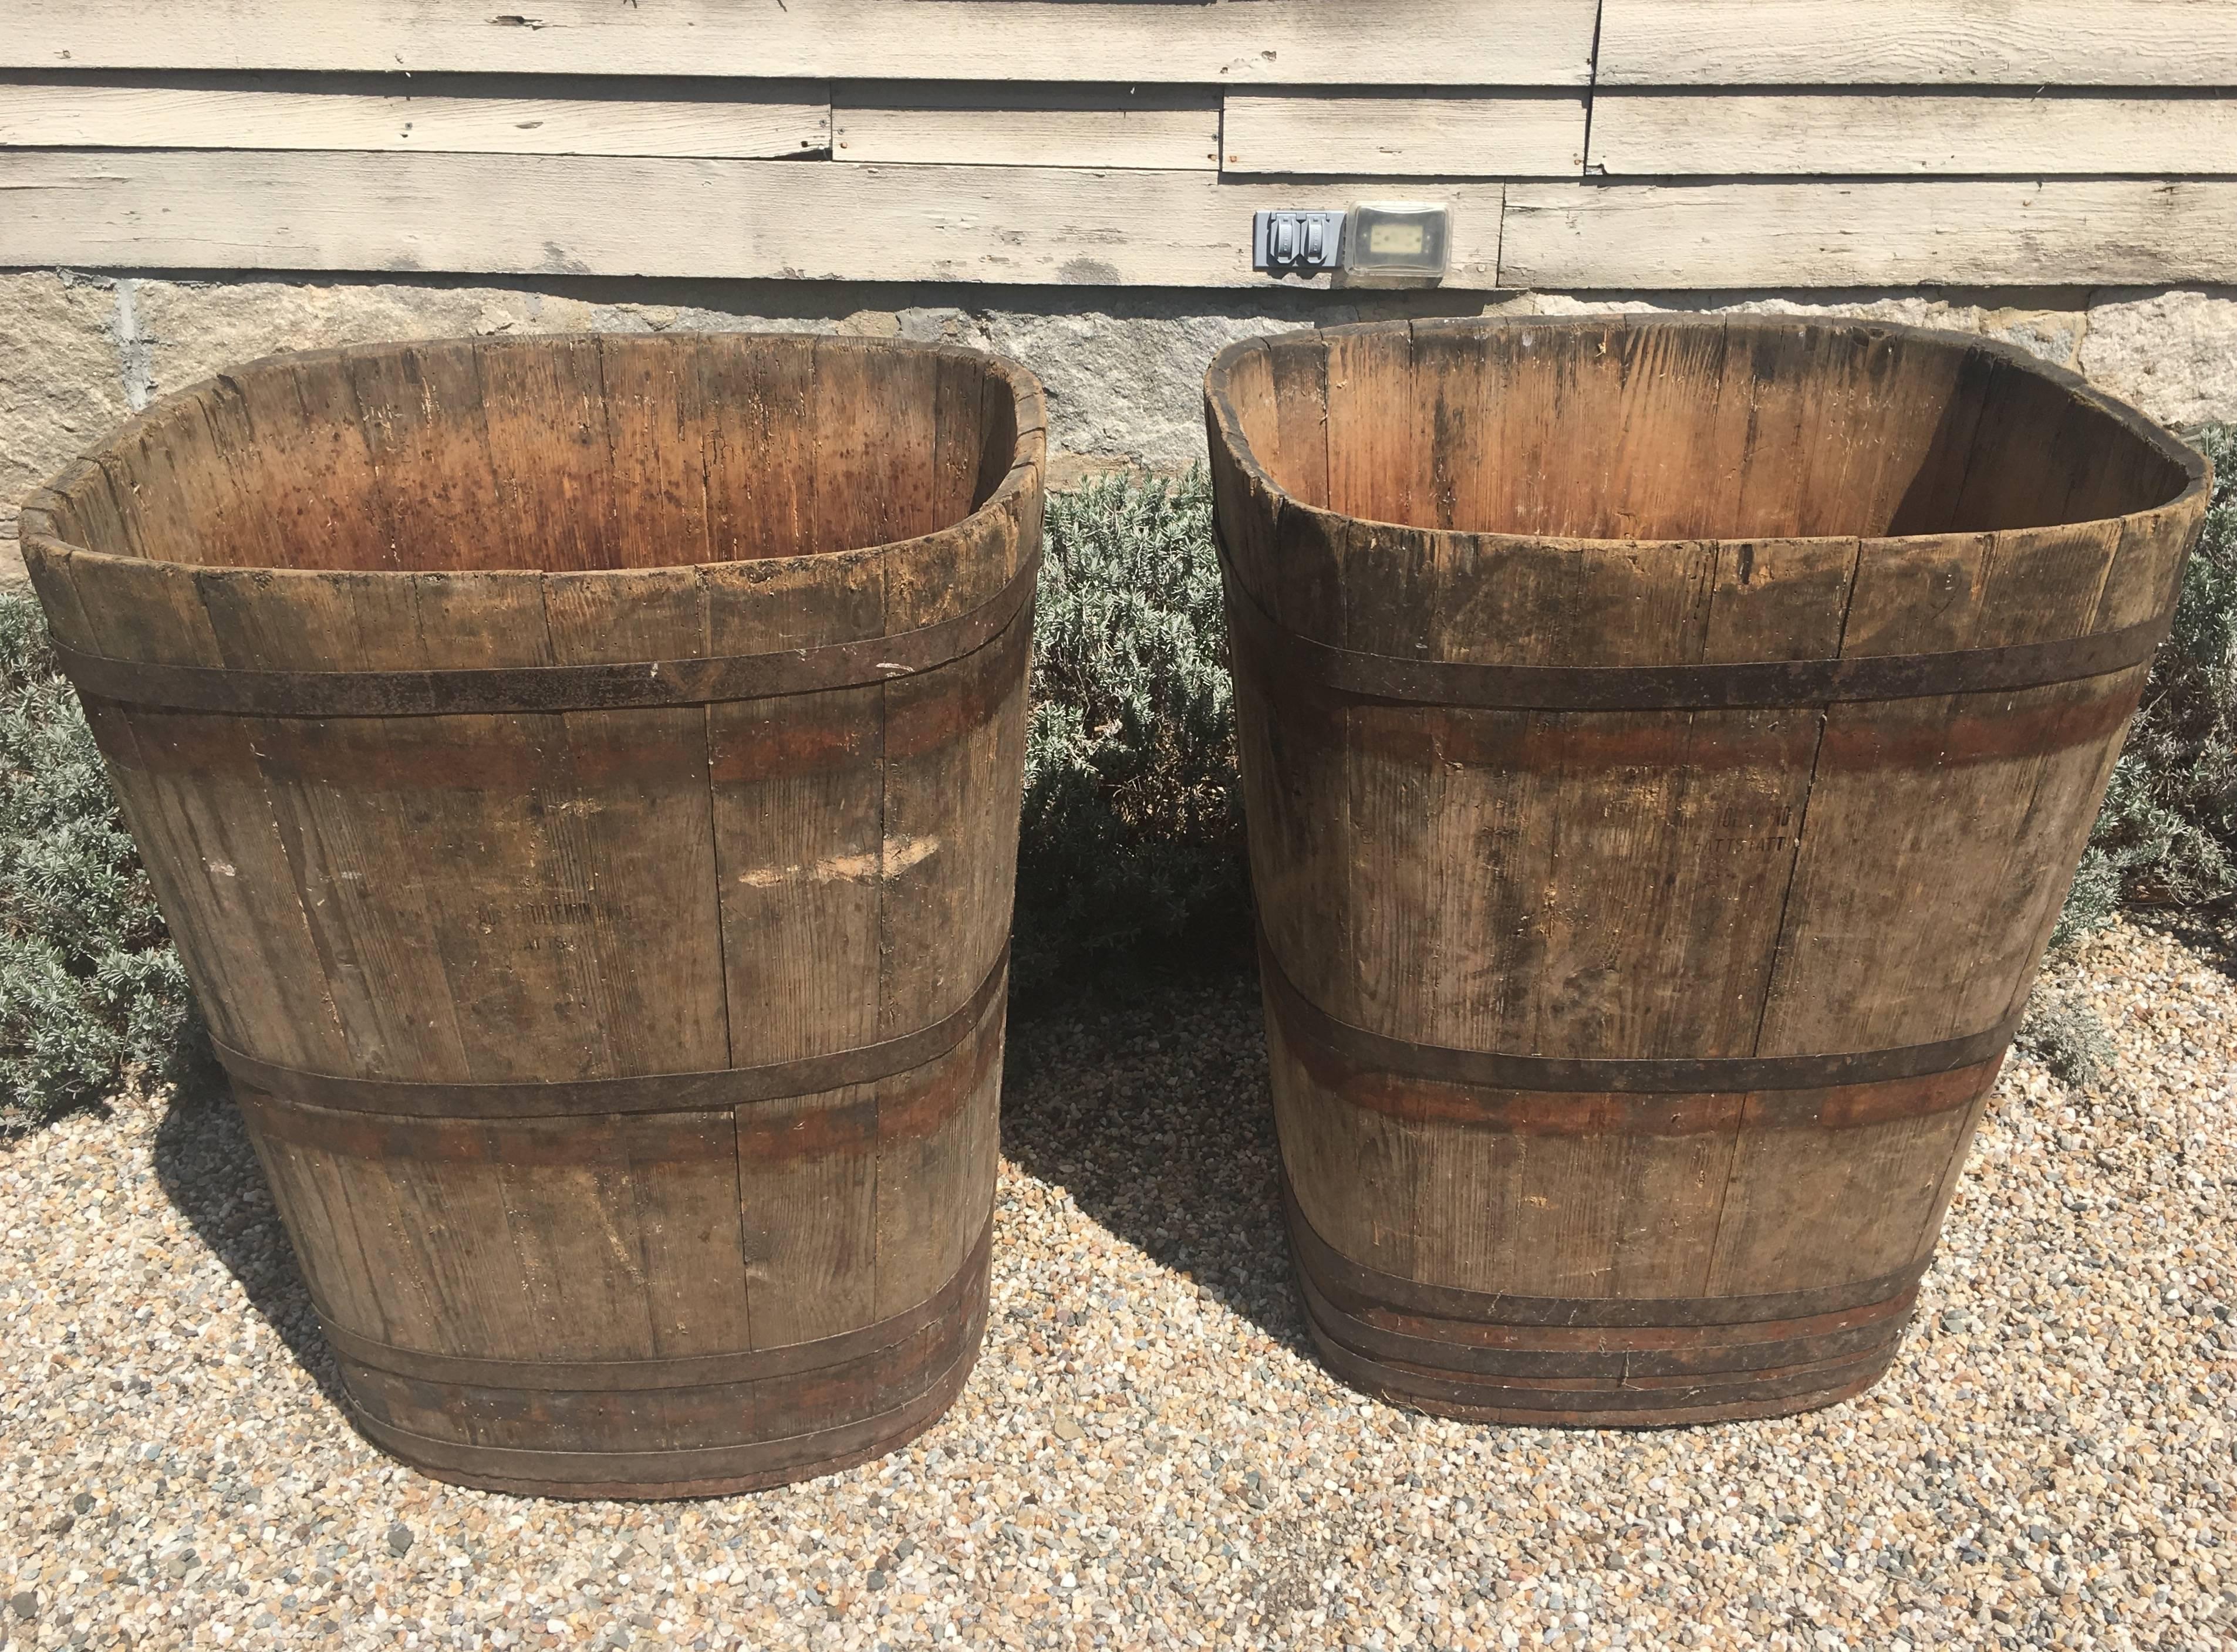 On one of our recent buying trips, we were fortunate enough to source four pairs of very large wooden tubs that were used as Master Collection Vessels for the grape harvest in Alsace. At least one in each pair is stamped by its maker, 